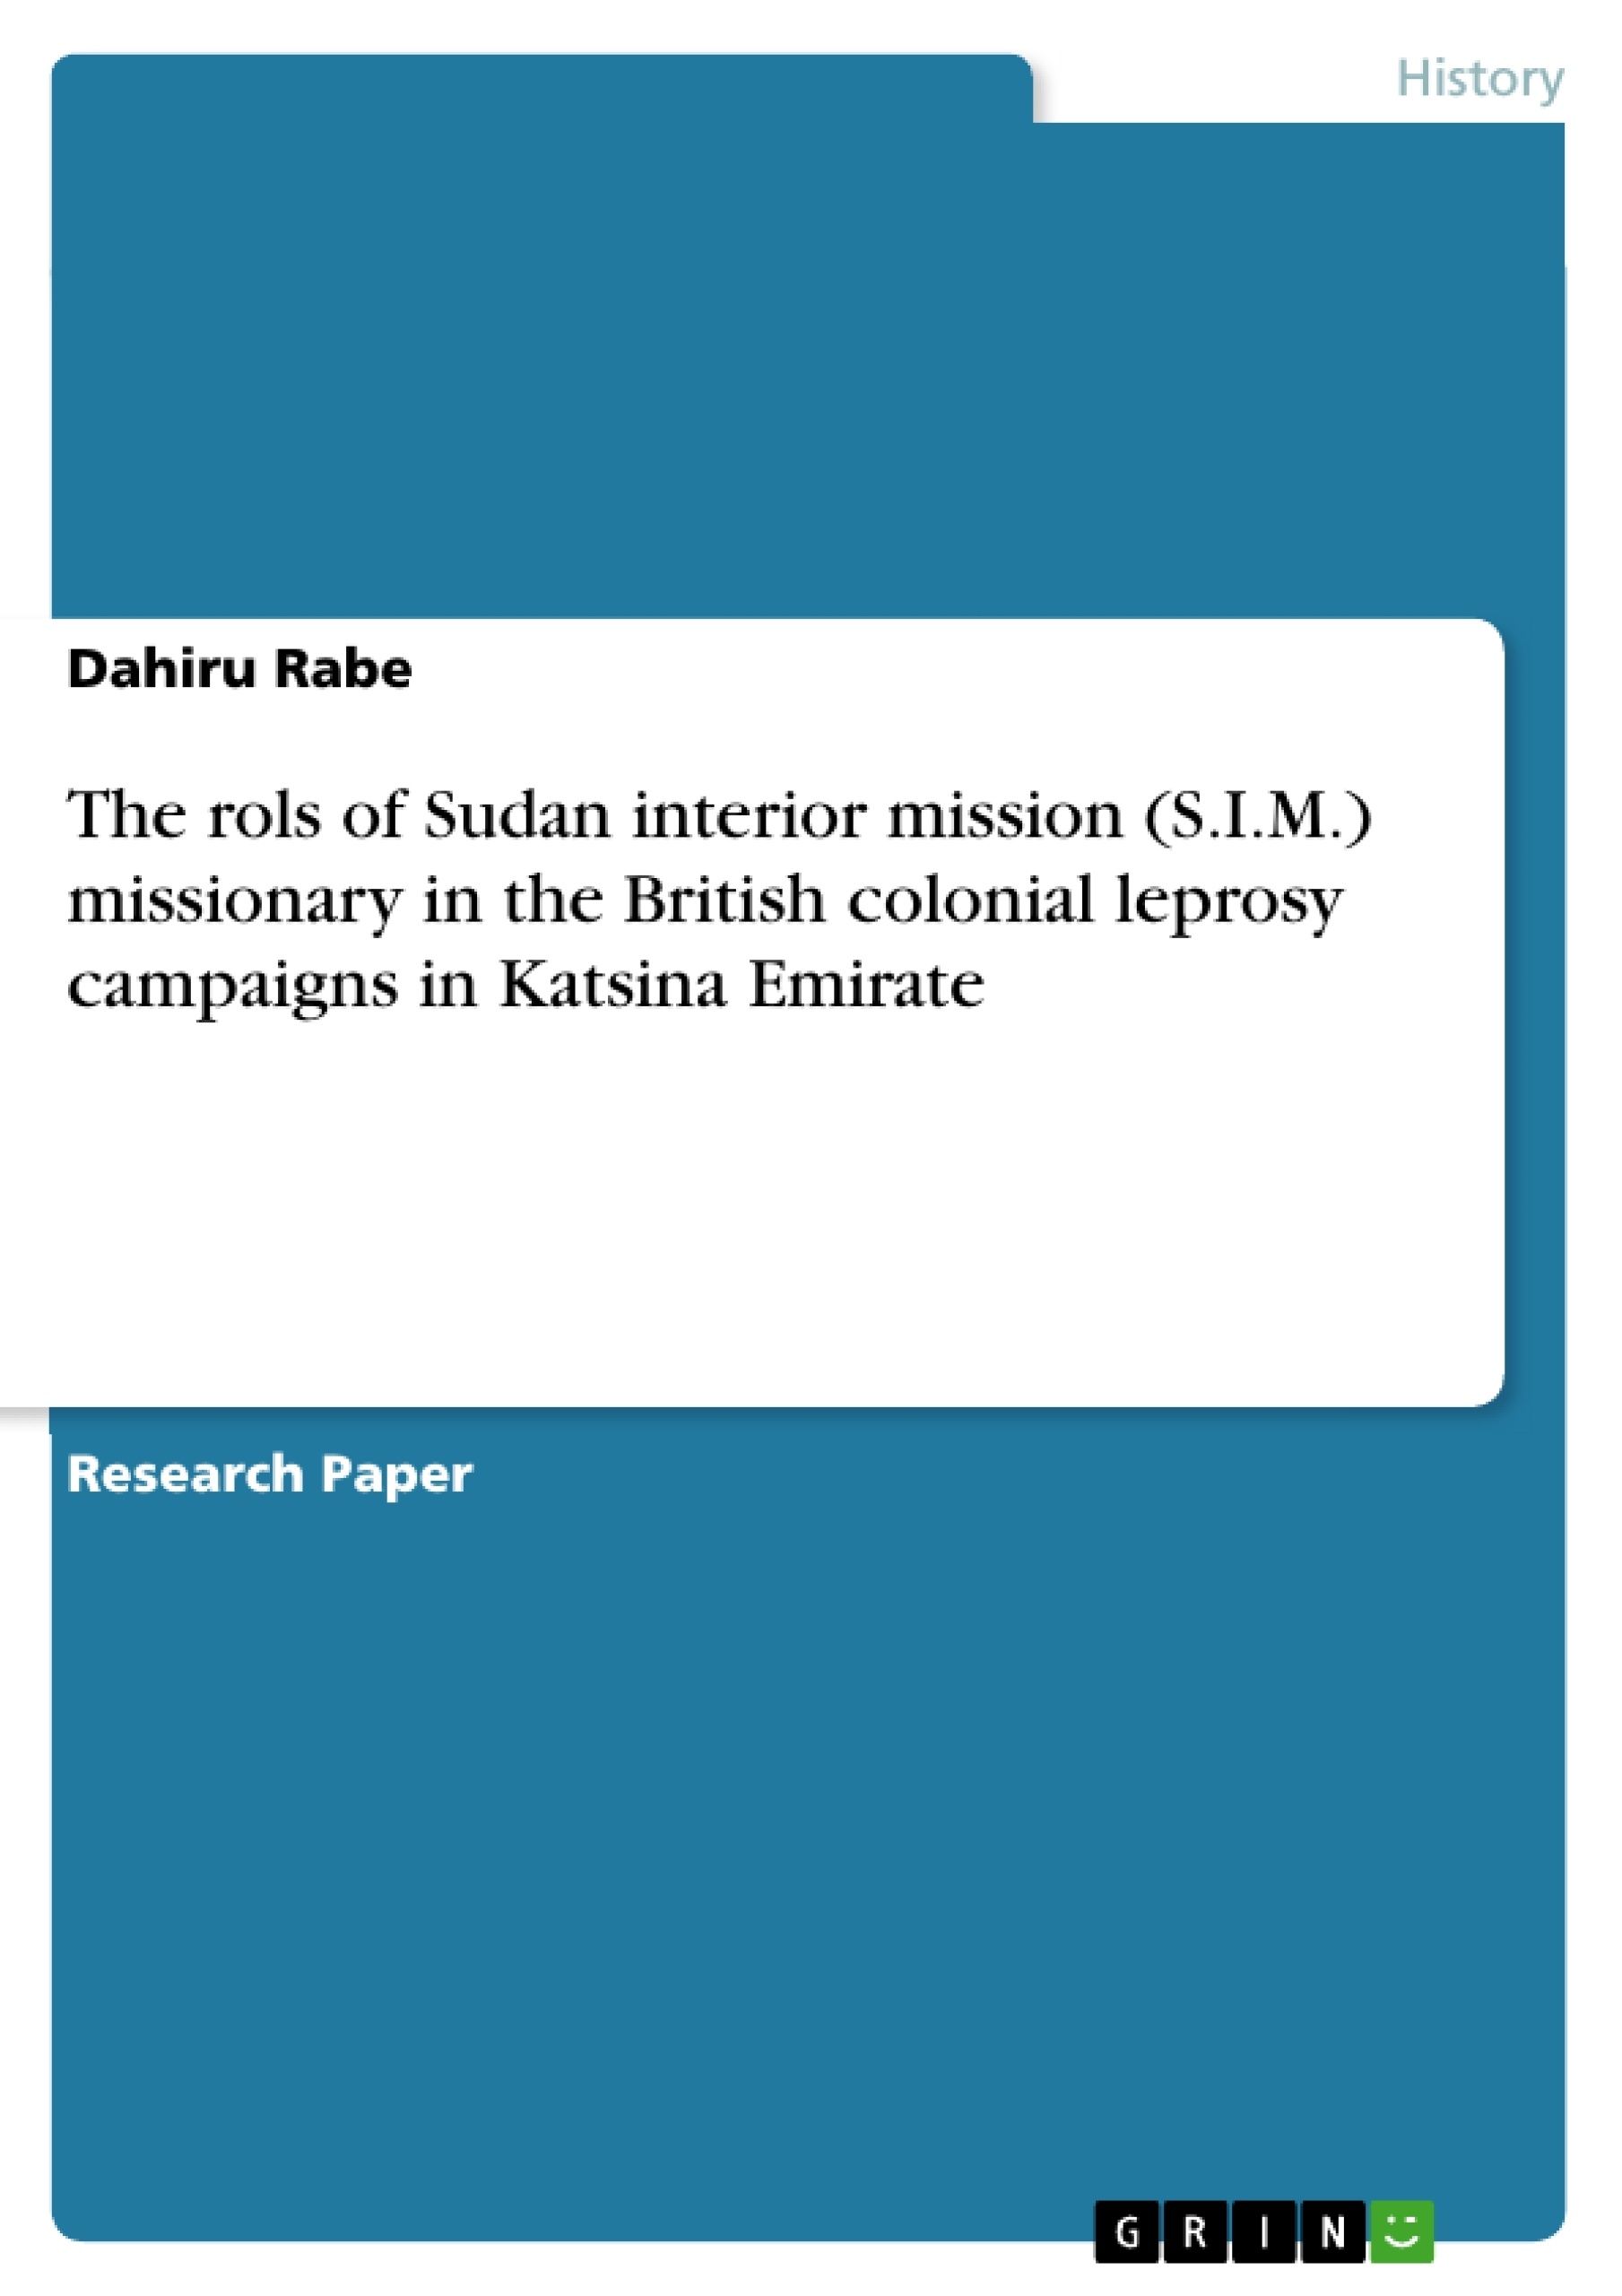 Titel: The rols of Sudan interior mission (S.I.M.) missionary in the British colonial leprosy campaigns in Katsina Emirate